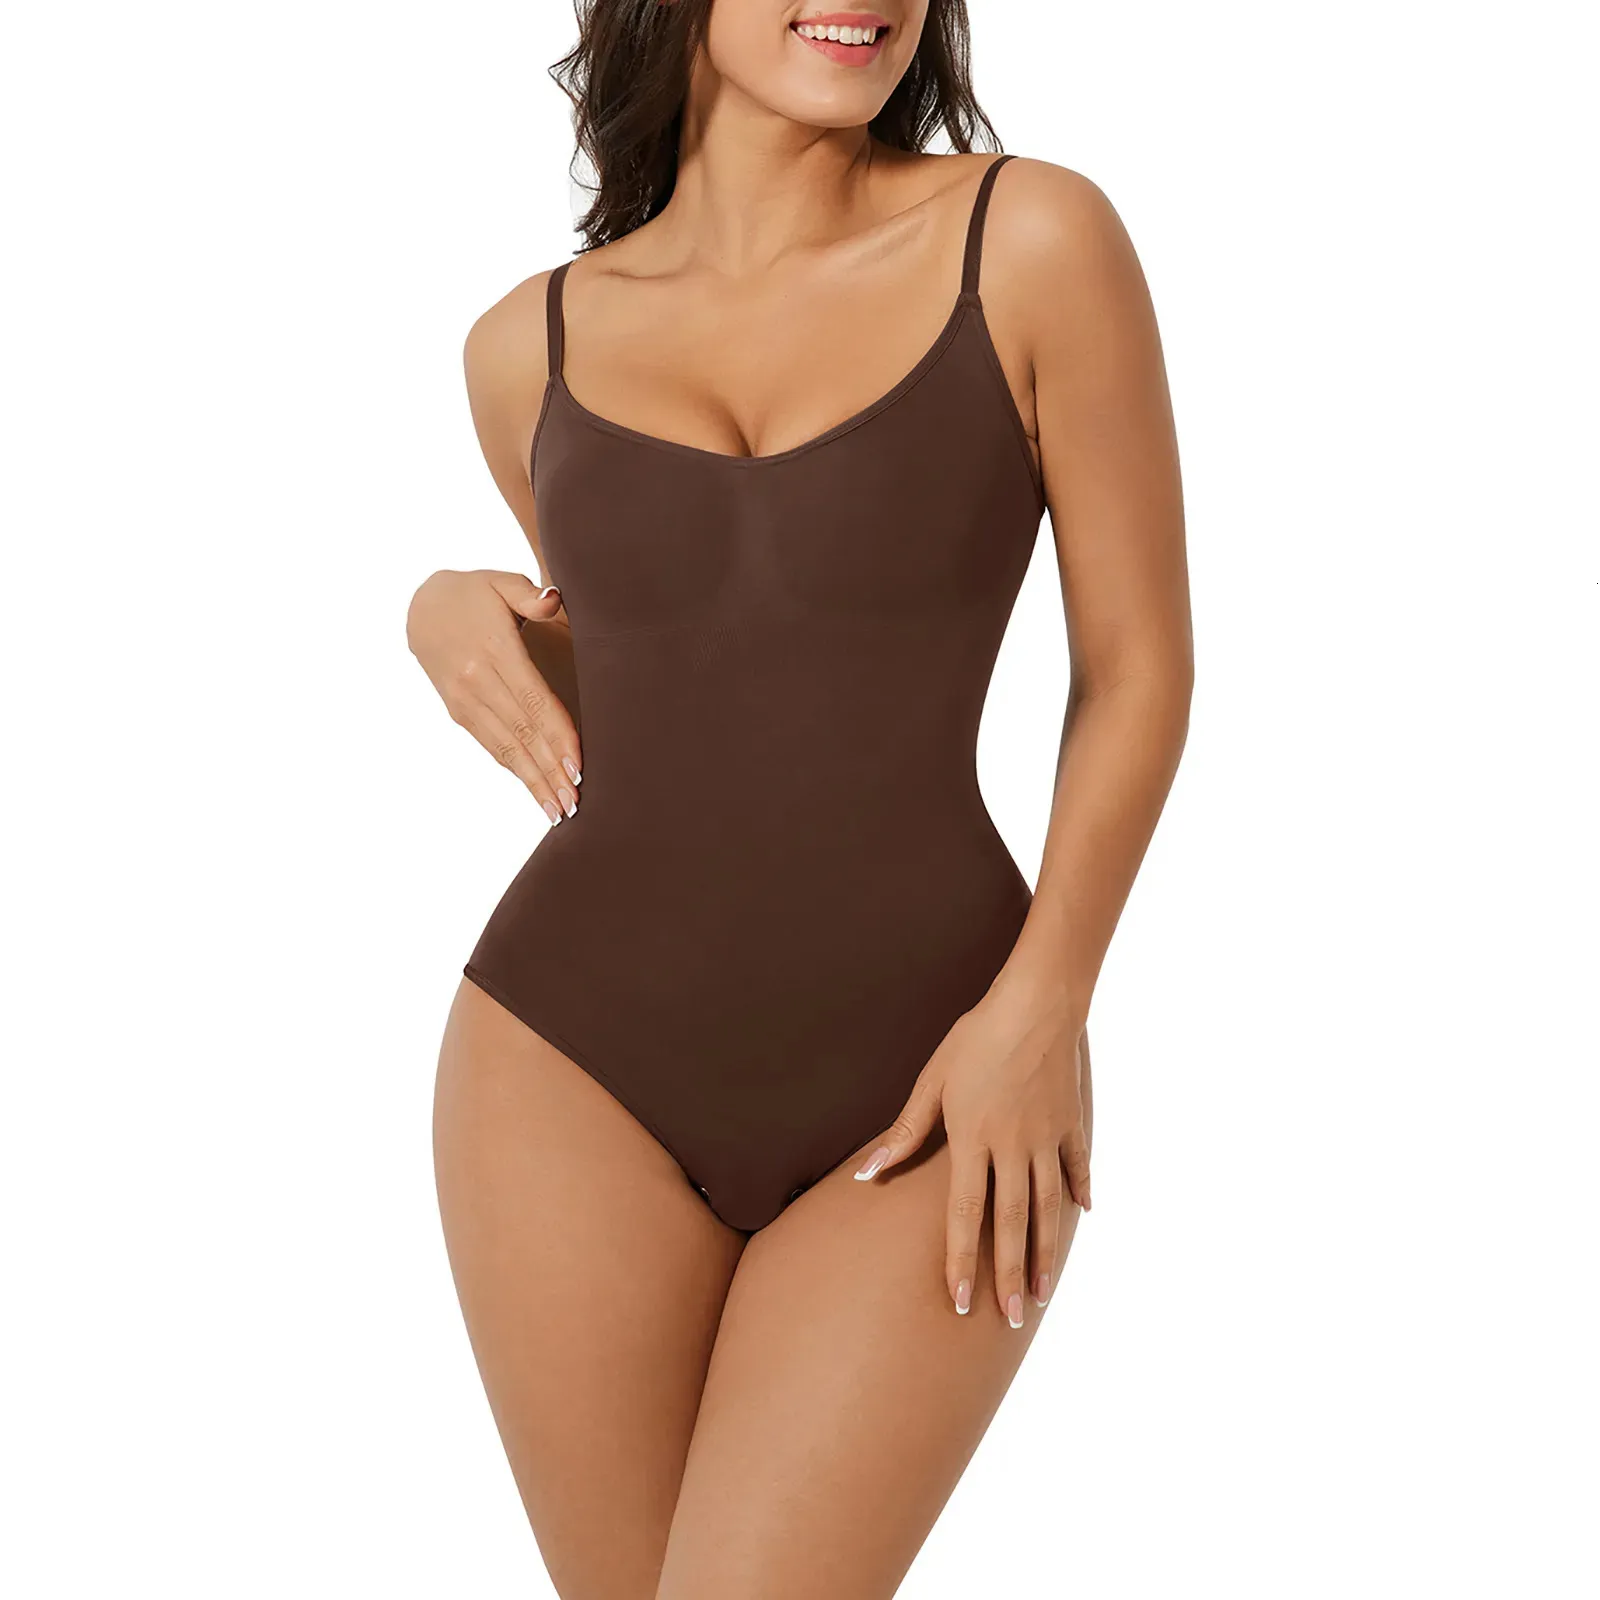 Colombian Seamless Bodysuit With Tummy Control And Waist Trainer For Women  Body Shaper, Slimming Underwear, And Corset Shapewear Bodysuit Shapewear  231025 From Sellerstore03, $22.62